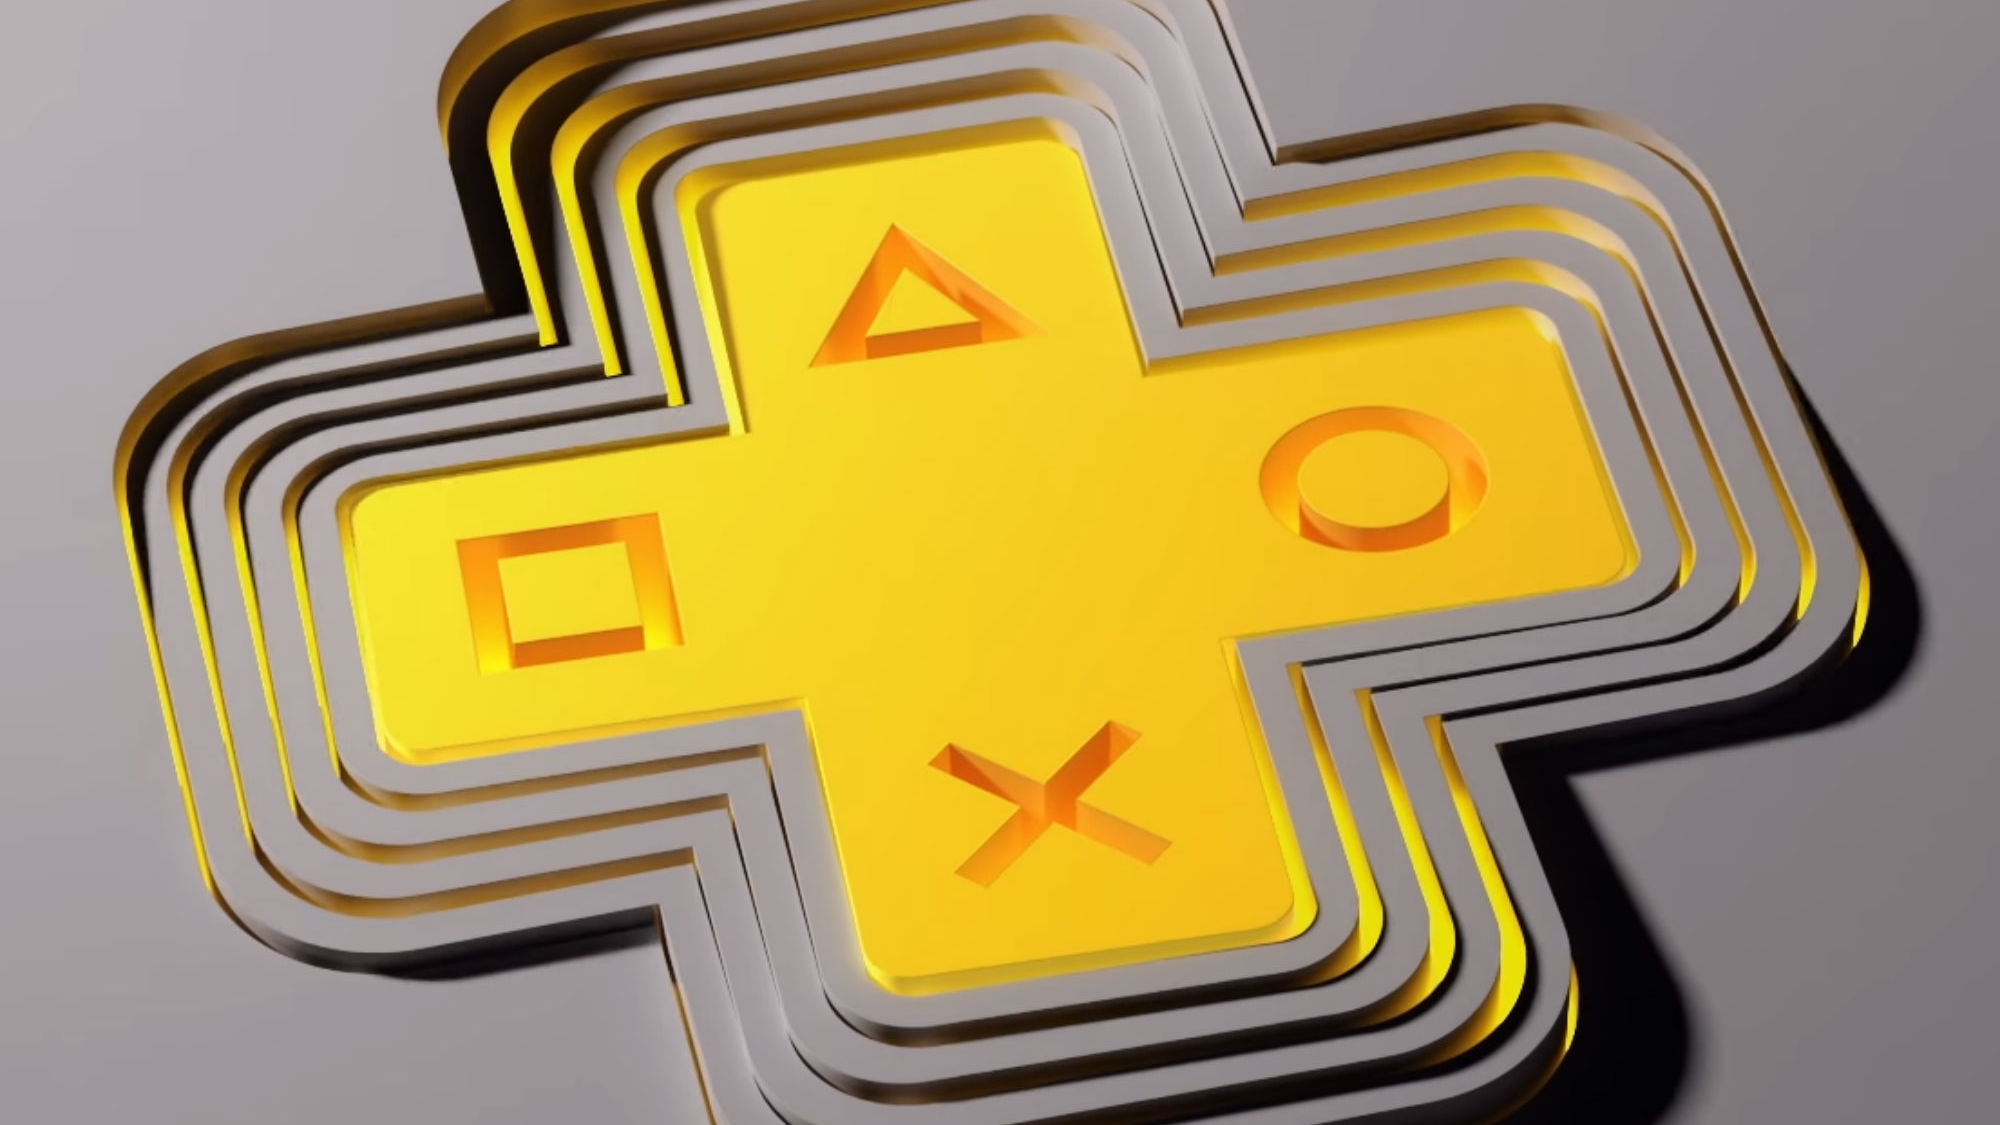 A D-pad in the PlayStation Plus logo